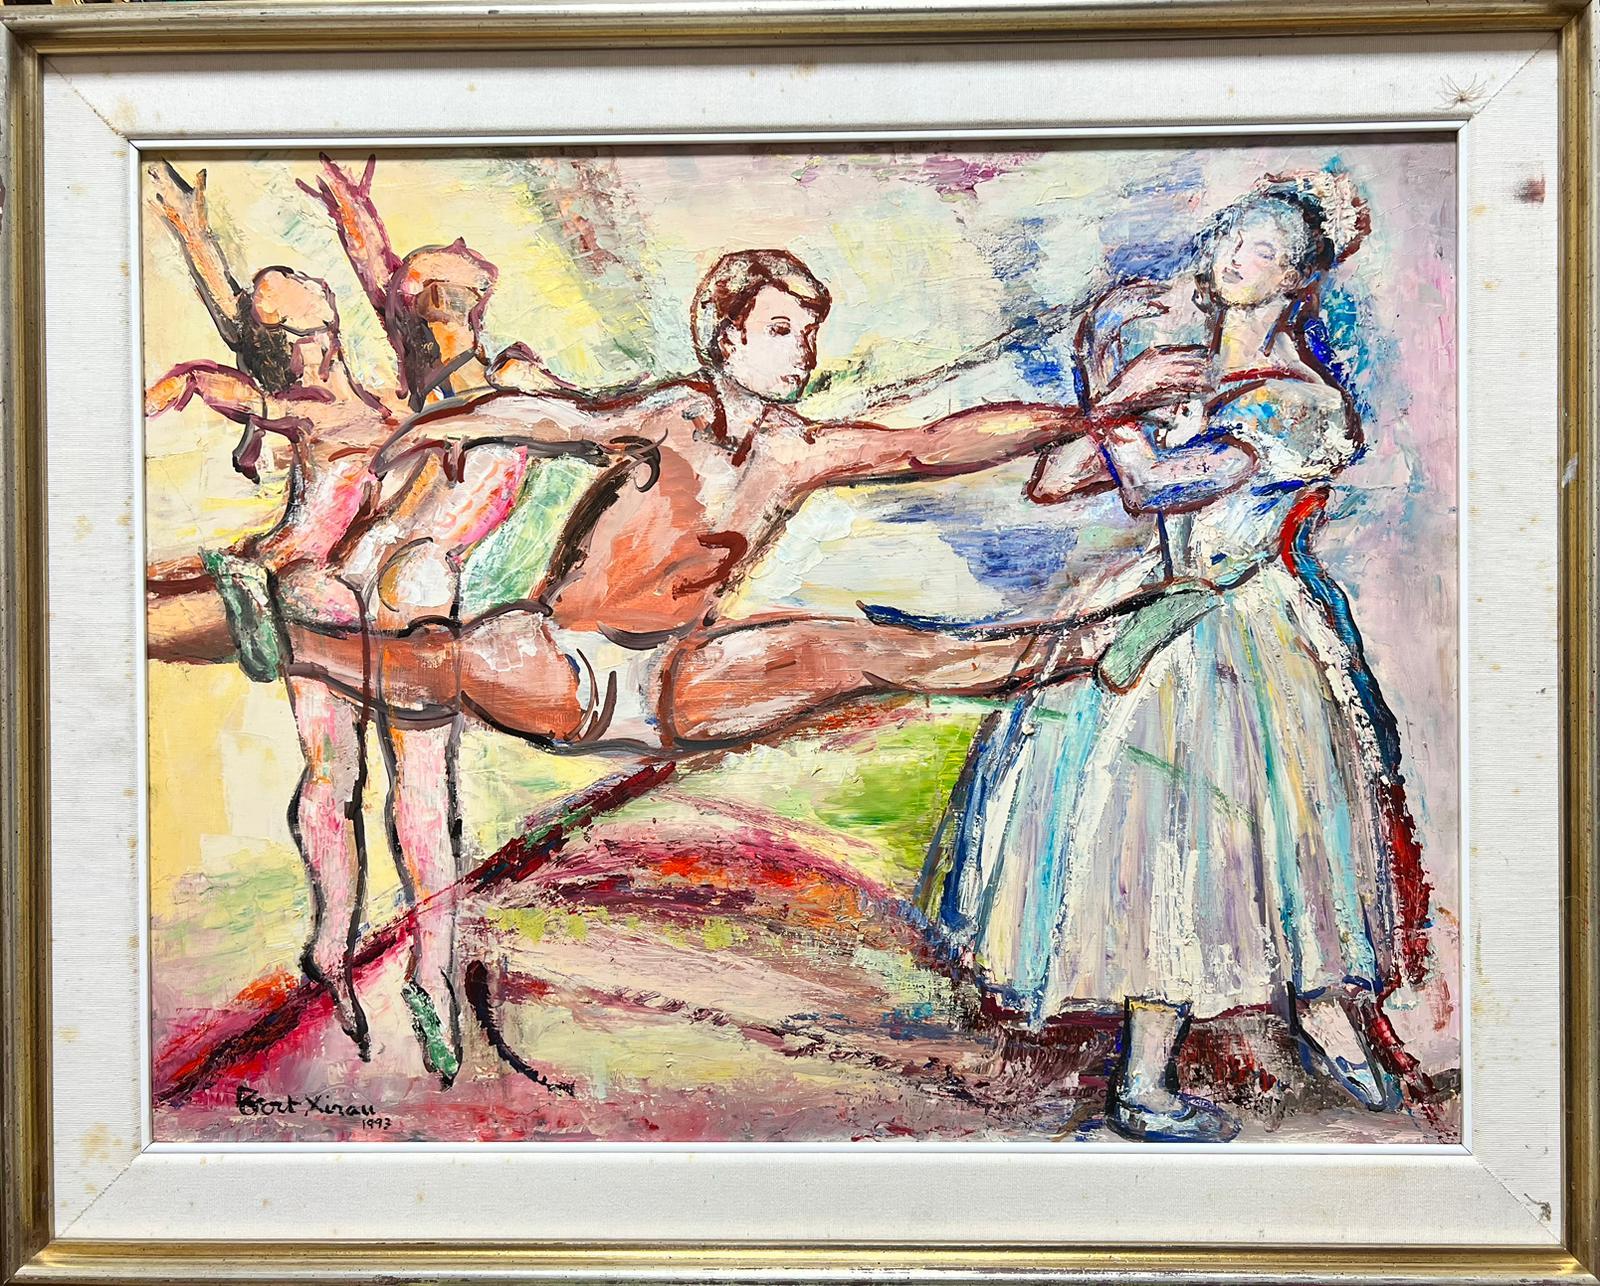 The Ballet Lesson
by Maria Tort Xirau (Catalan, 1924-2018)
signed lower corner
dated 1993
oil painting on board, framed

framed: 24 x 30.5 inches
board: 20 x 26 inches

Very good condition. 

Provenance: private collection

Maria Tort Xirau (